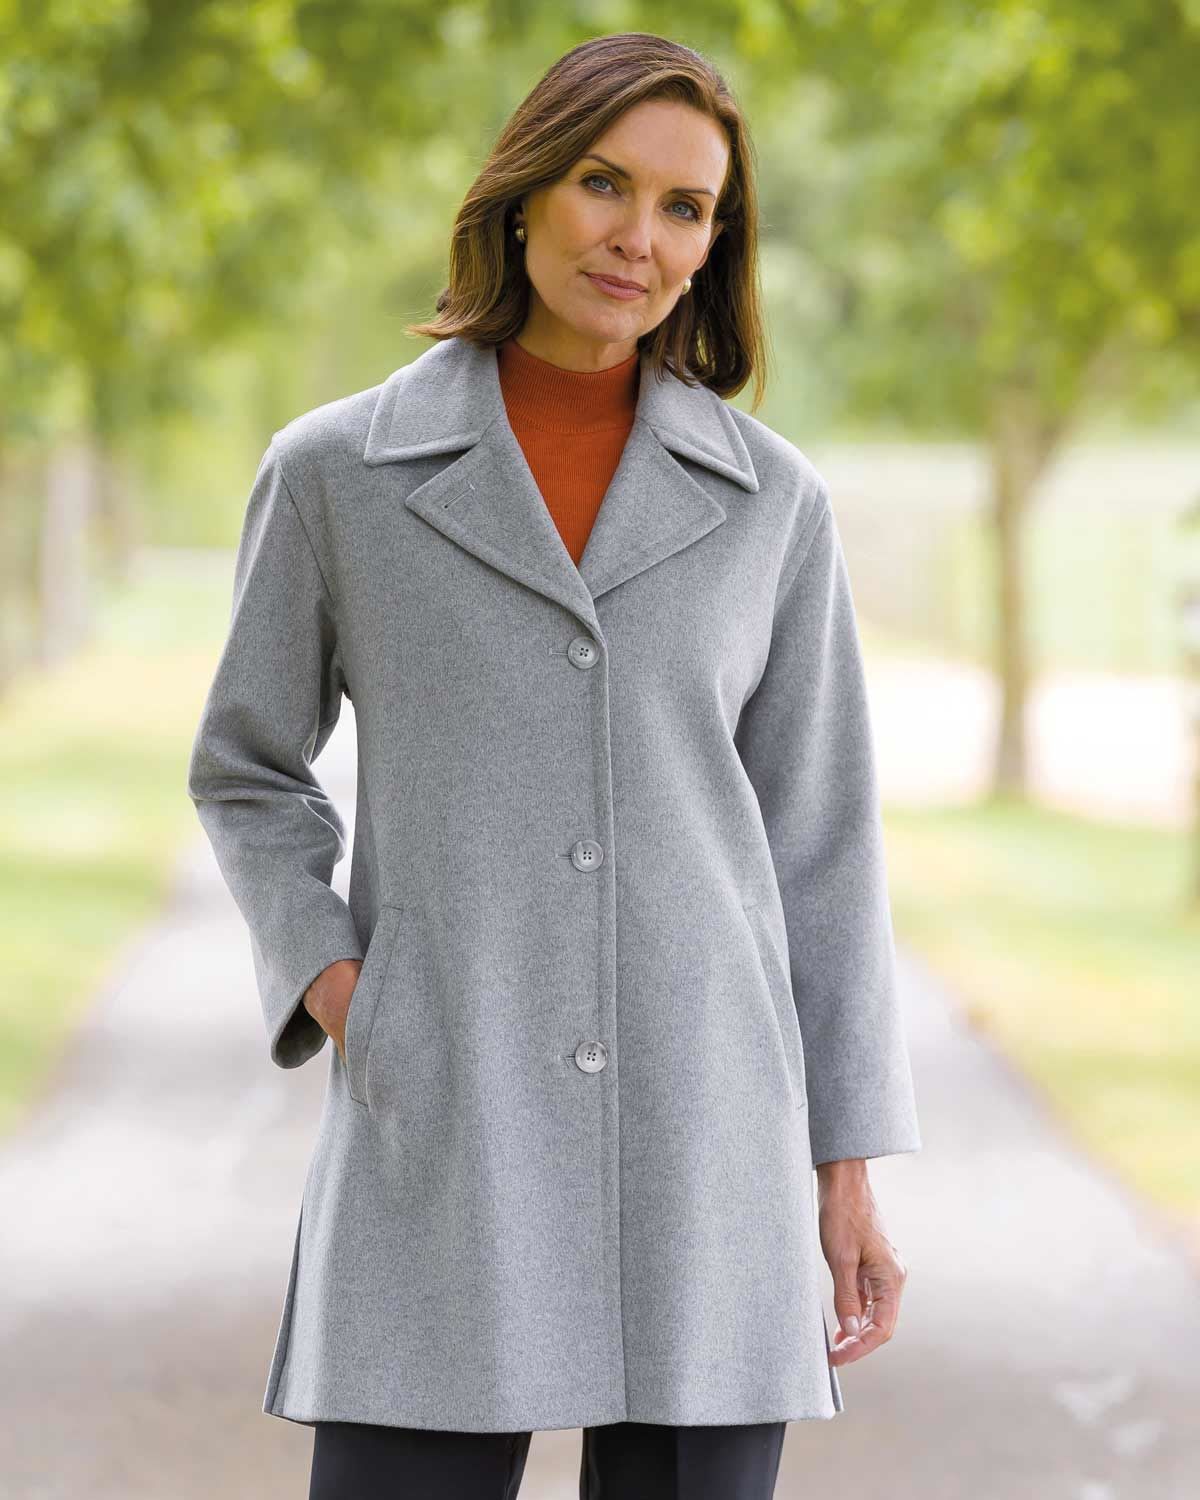 Ladies Grey Buckland Coat, fully lined three quarter length style